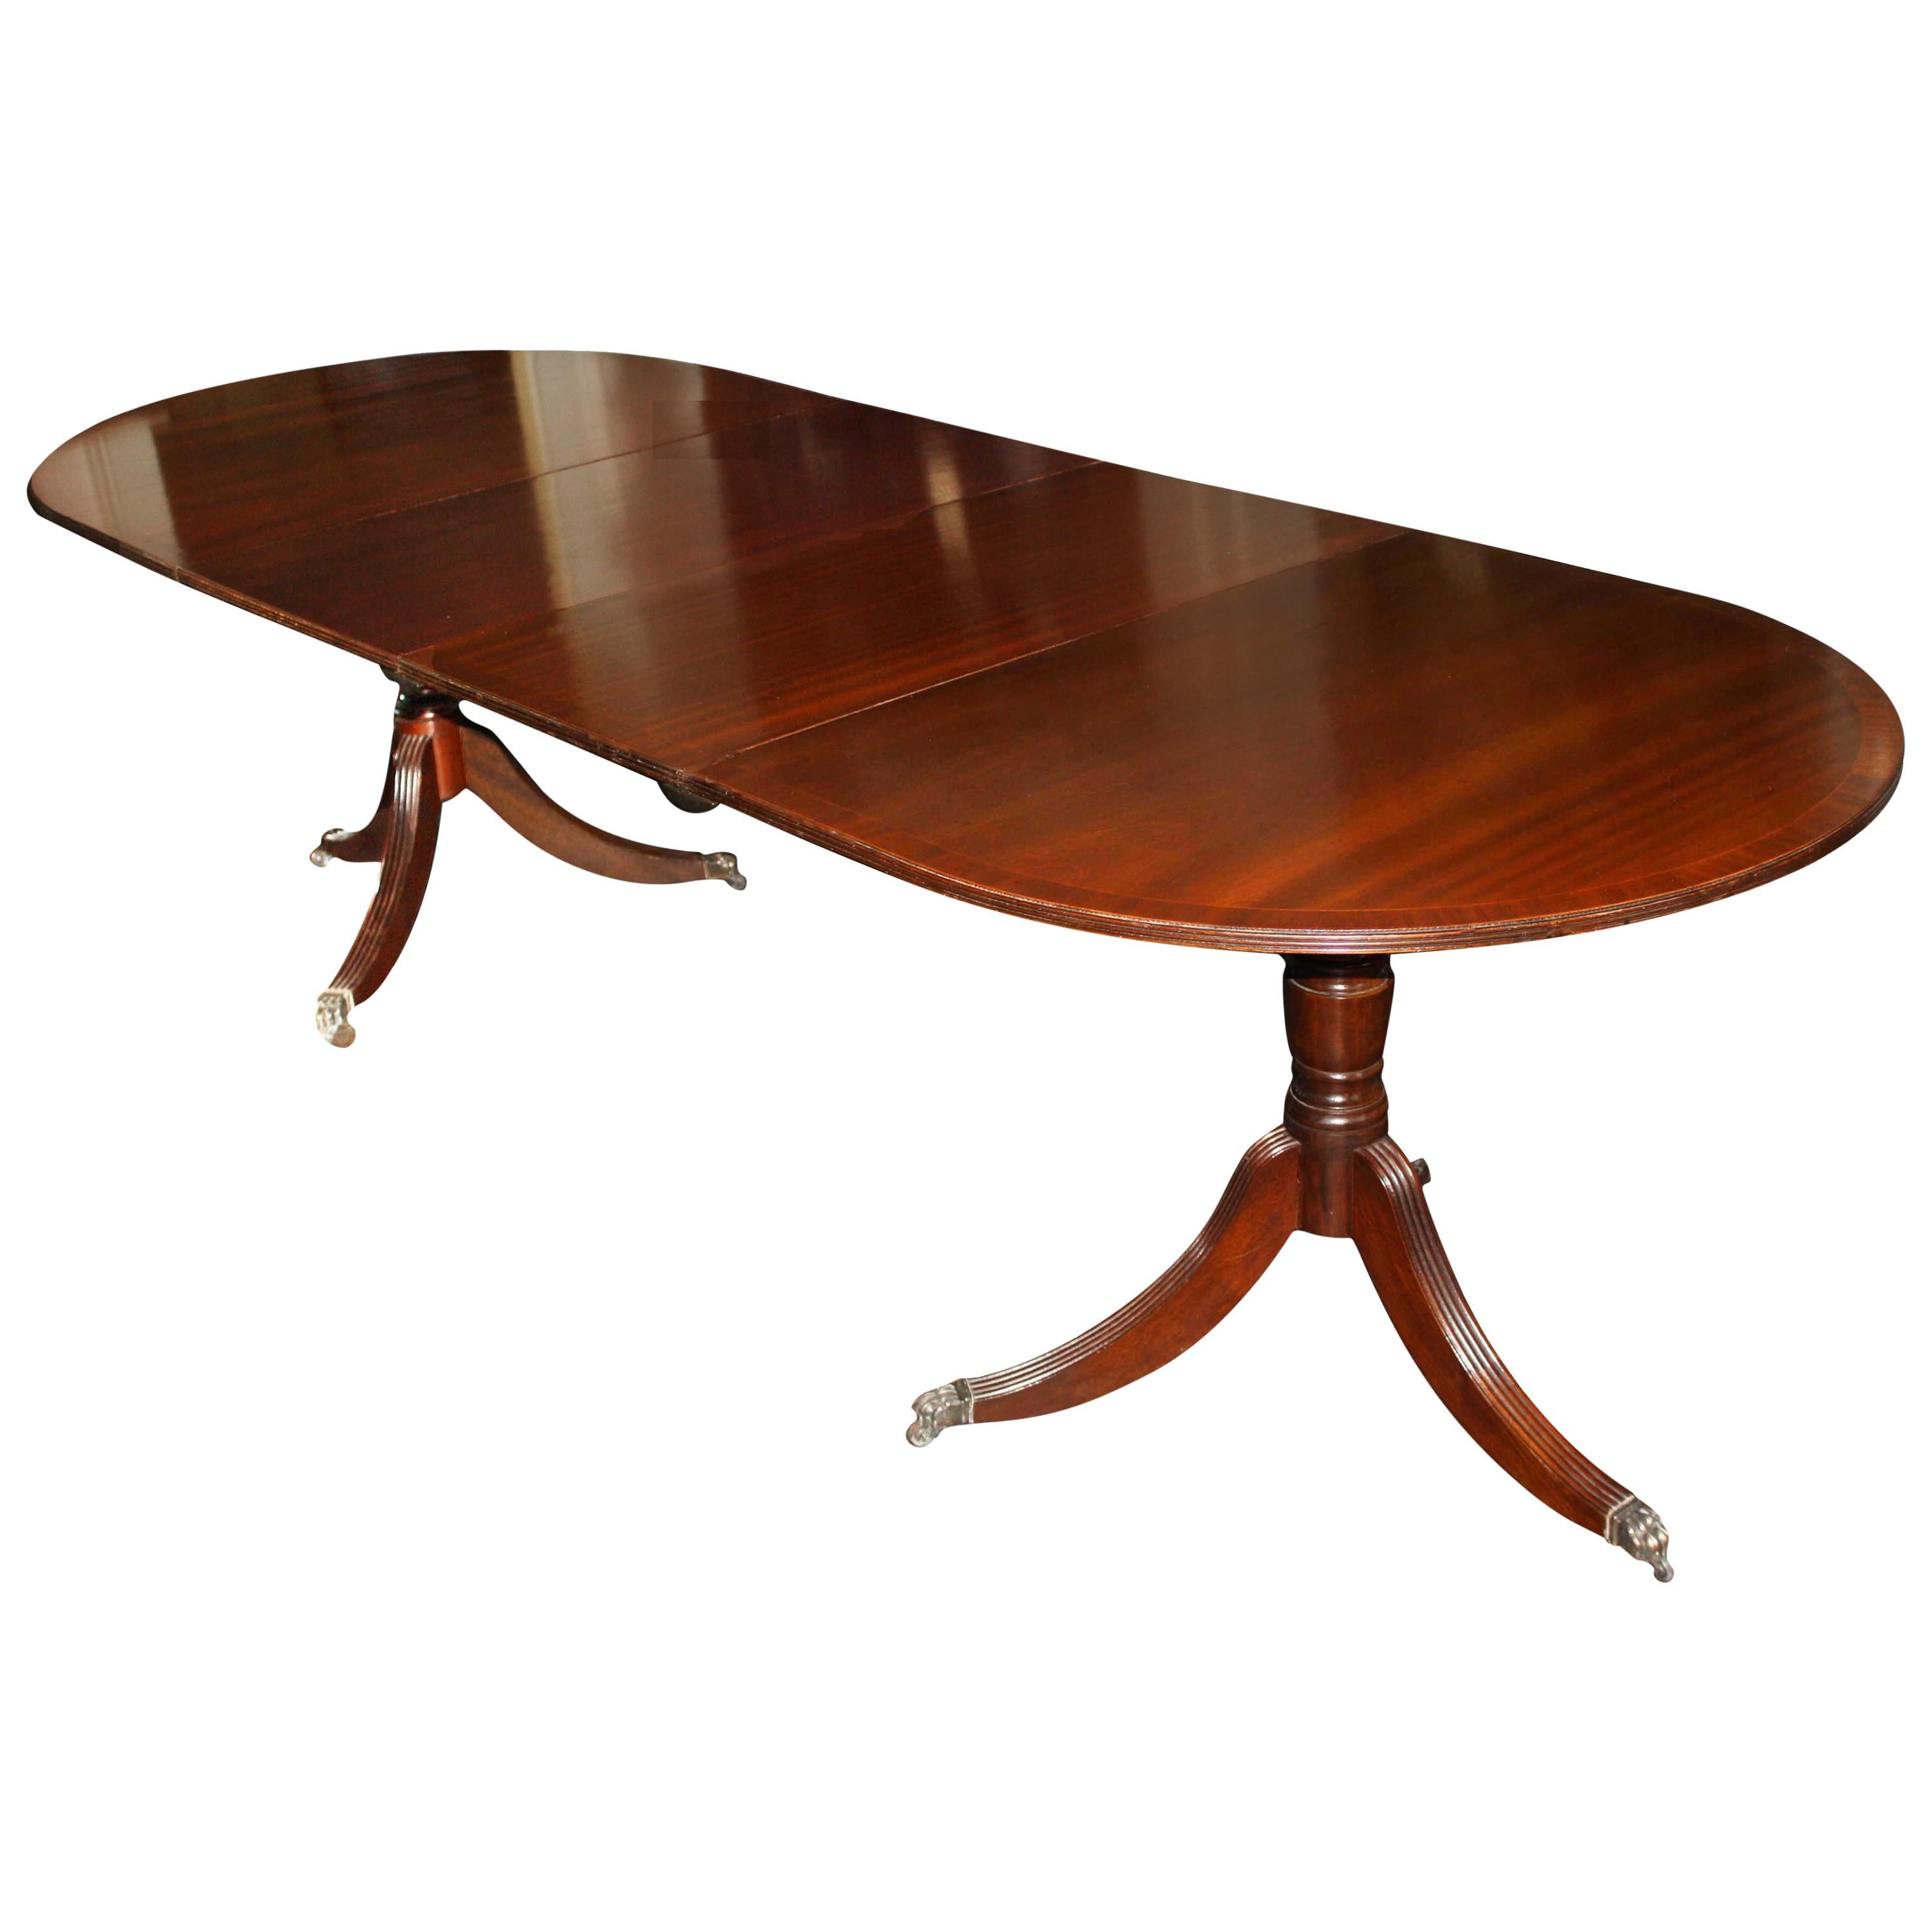 Early Edwardian Double Pedestal Dining Table For Sale